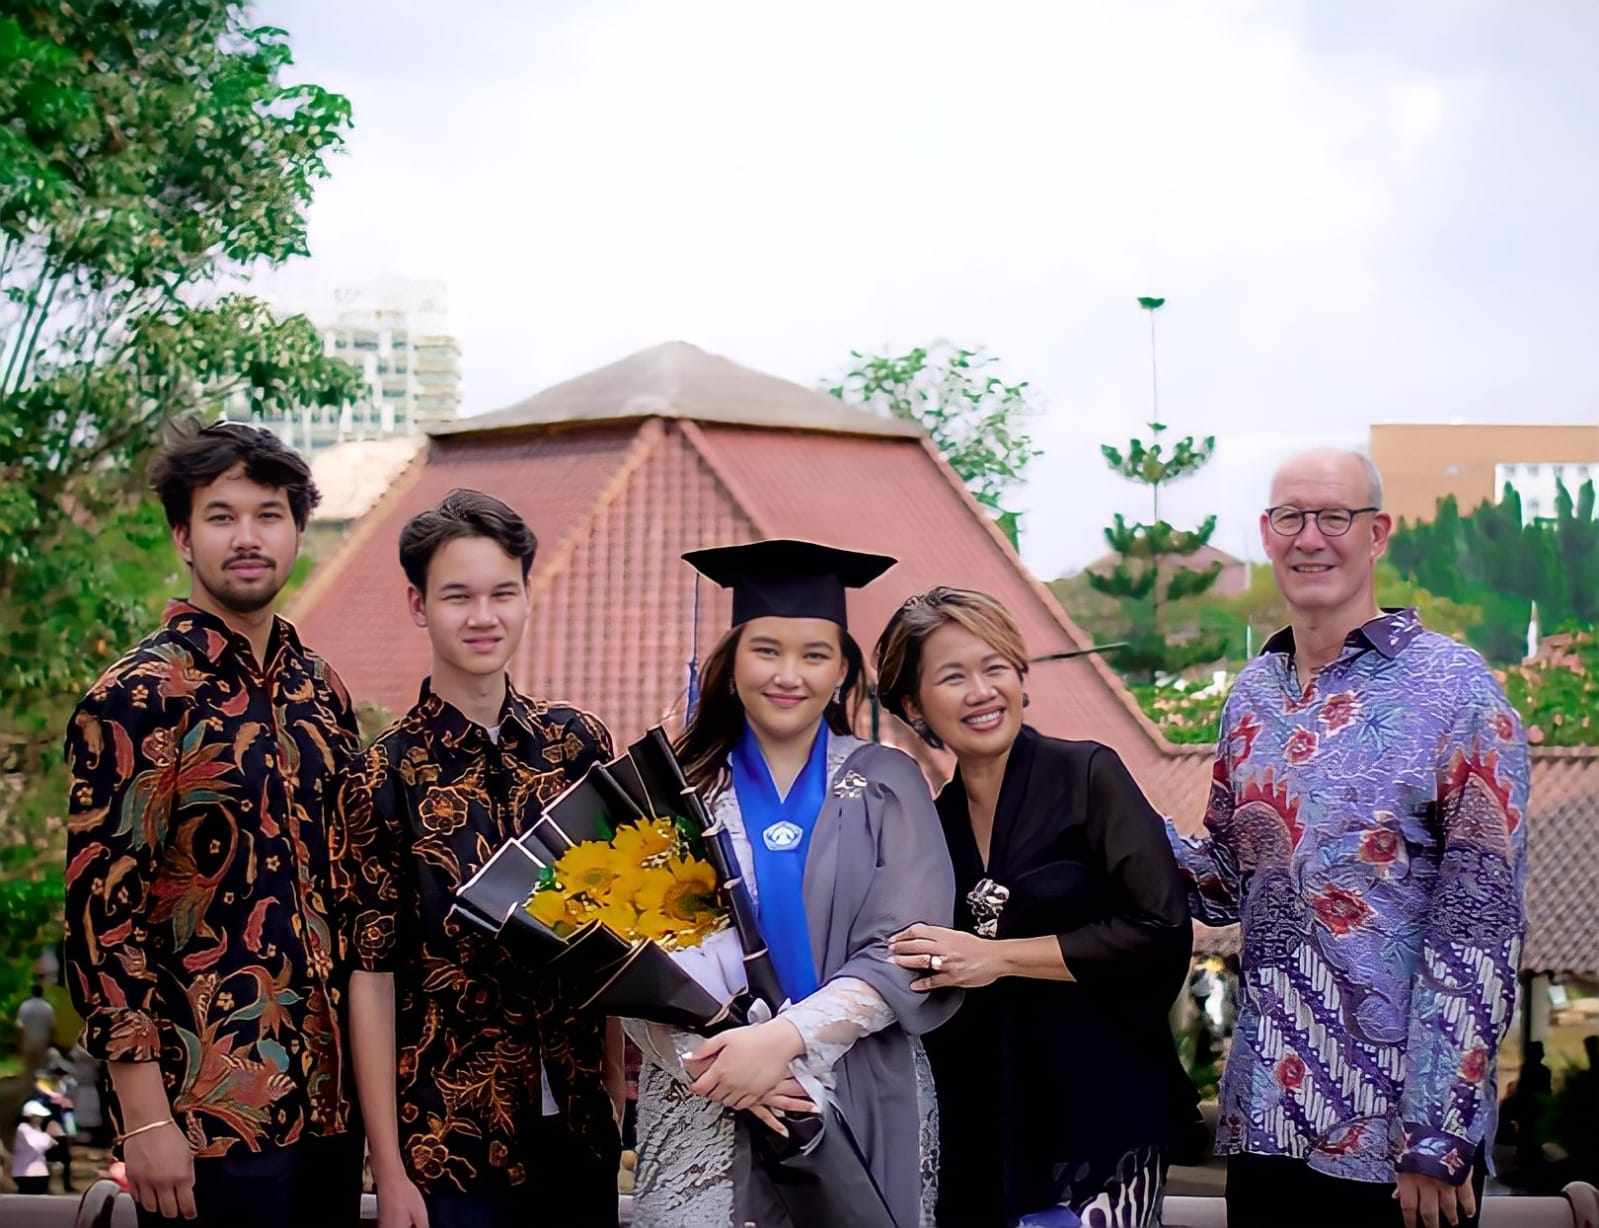 Rulita Anggraini (second from right), who is married to an American, said that her children would face “inner conflict” each time they have to decide between being a citizen of Indonesia or the US. Photo: Rulita Anggraini
